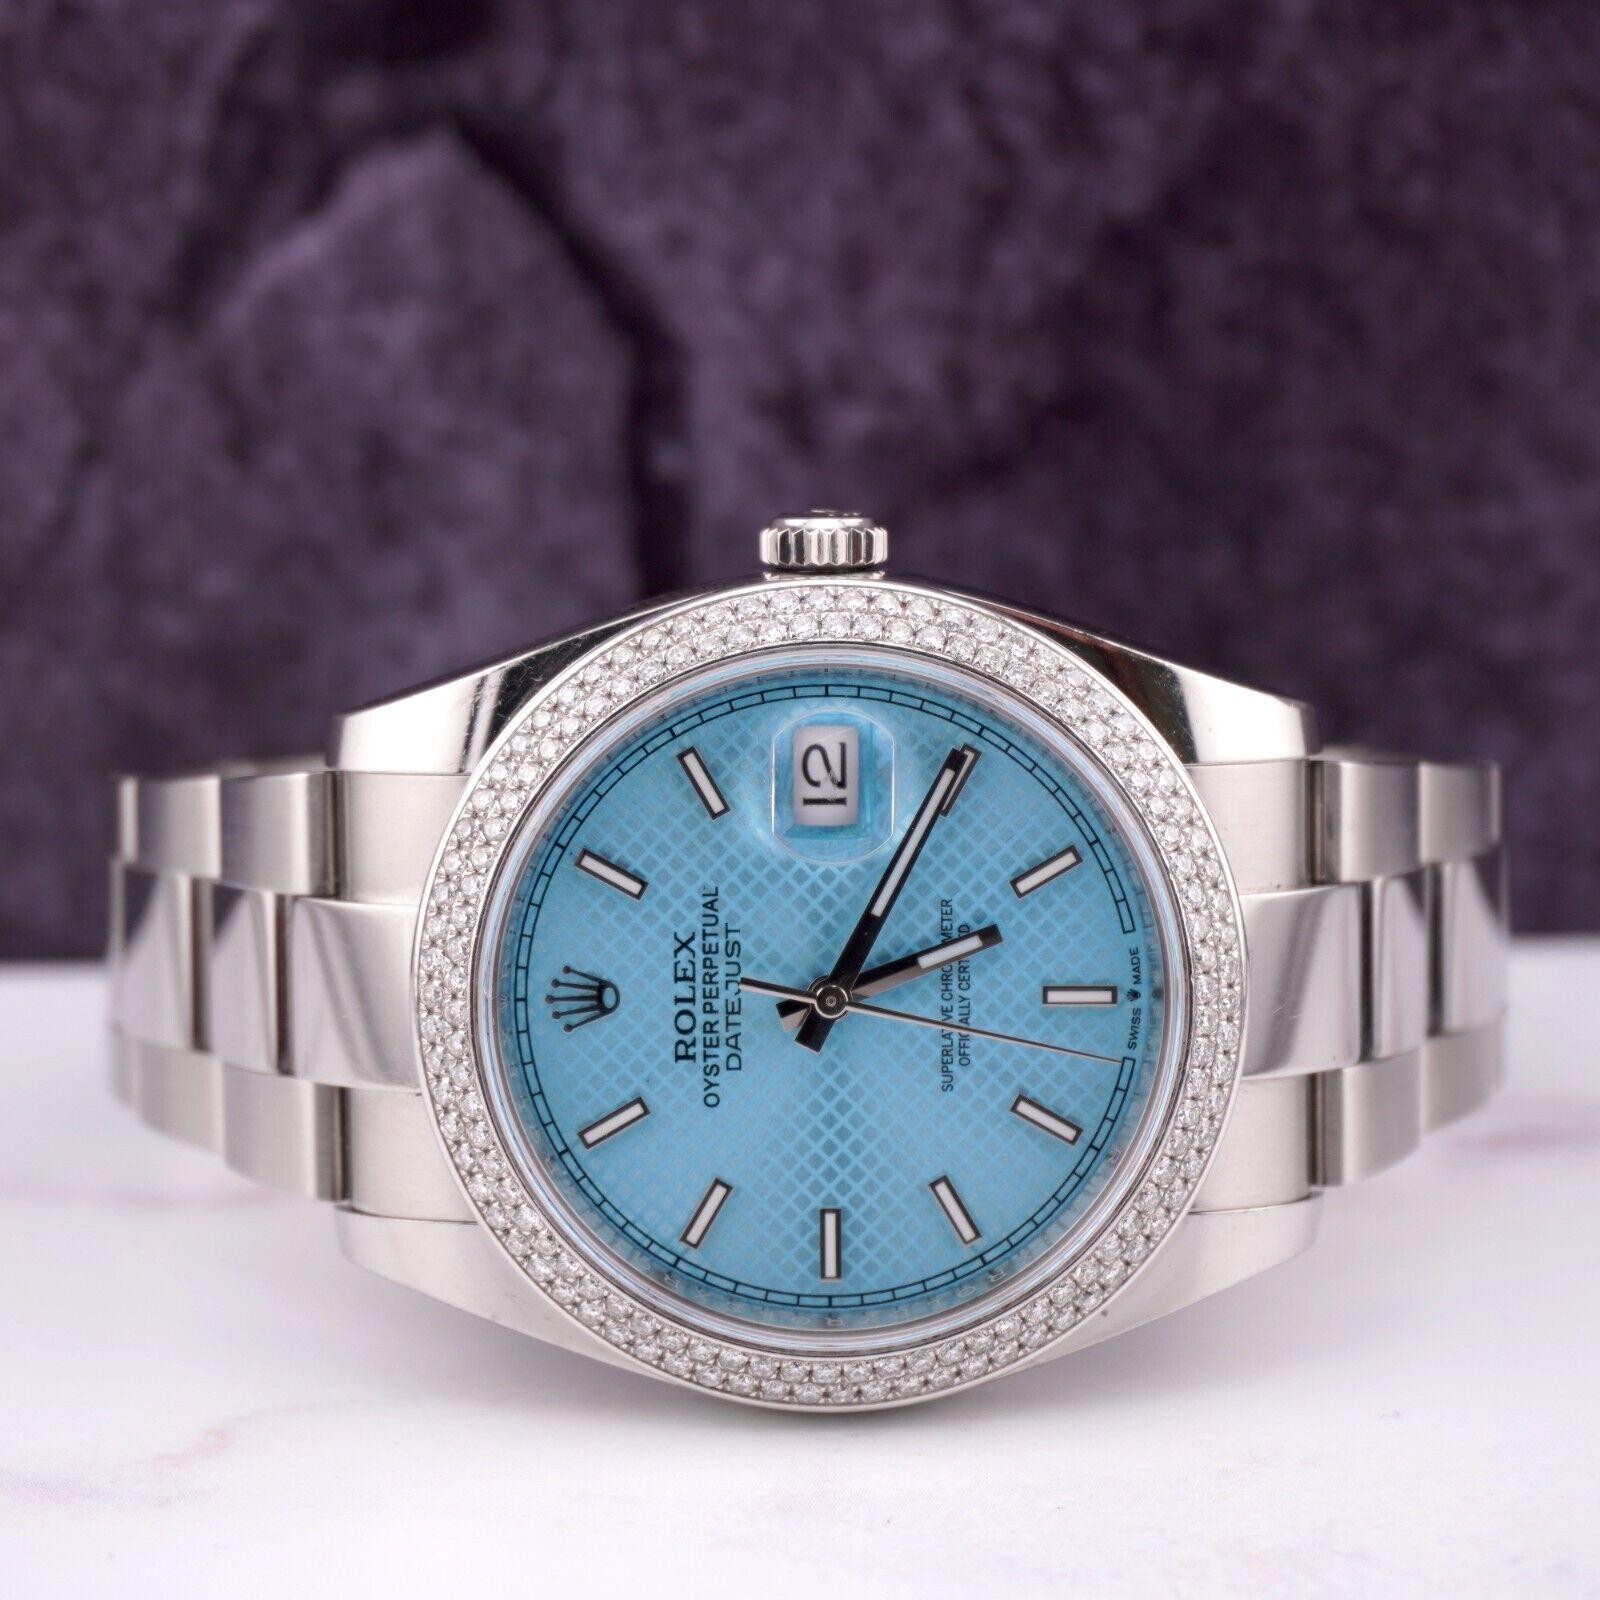 Rolex Datejust 41mm Watch. A Pre-owned watch w/ Original Box. Watch is 100% Authentic and Comes with Authenticity Card. Watch Reference is 126300 and is in Excellent Condition (See Pictures). The dial color is Ice Blue and material is Stainless